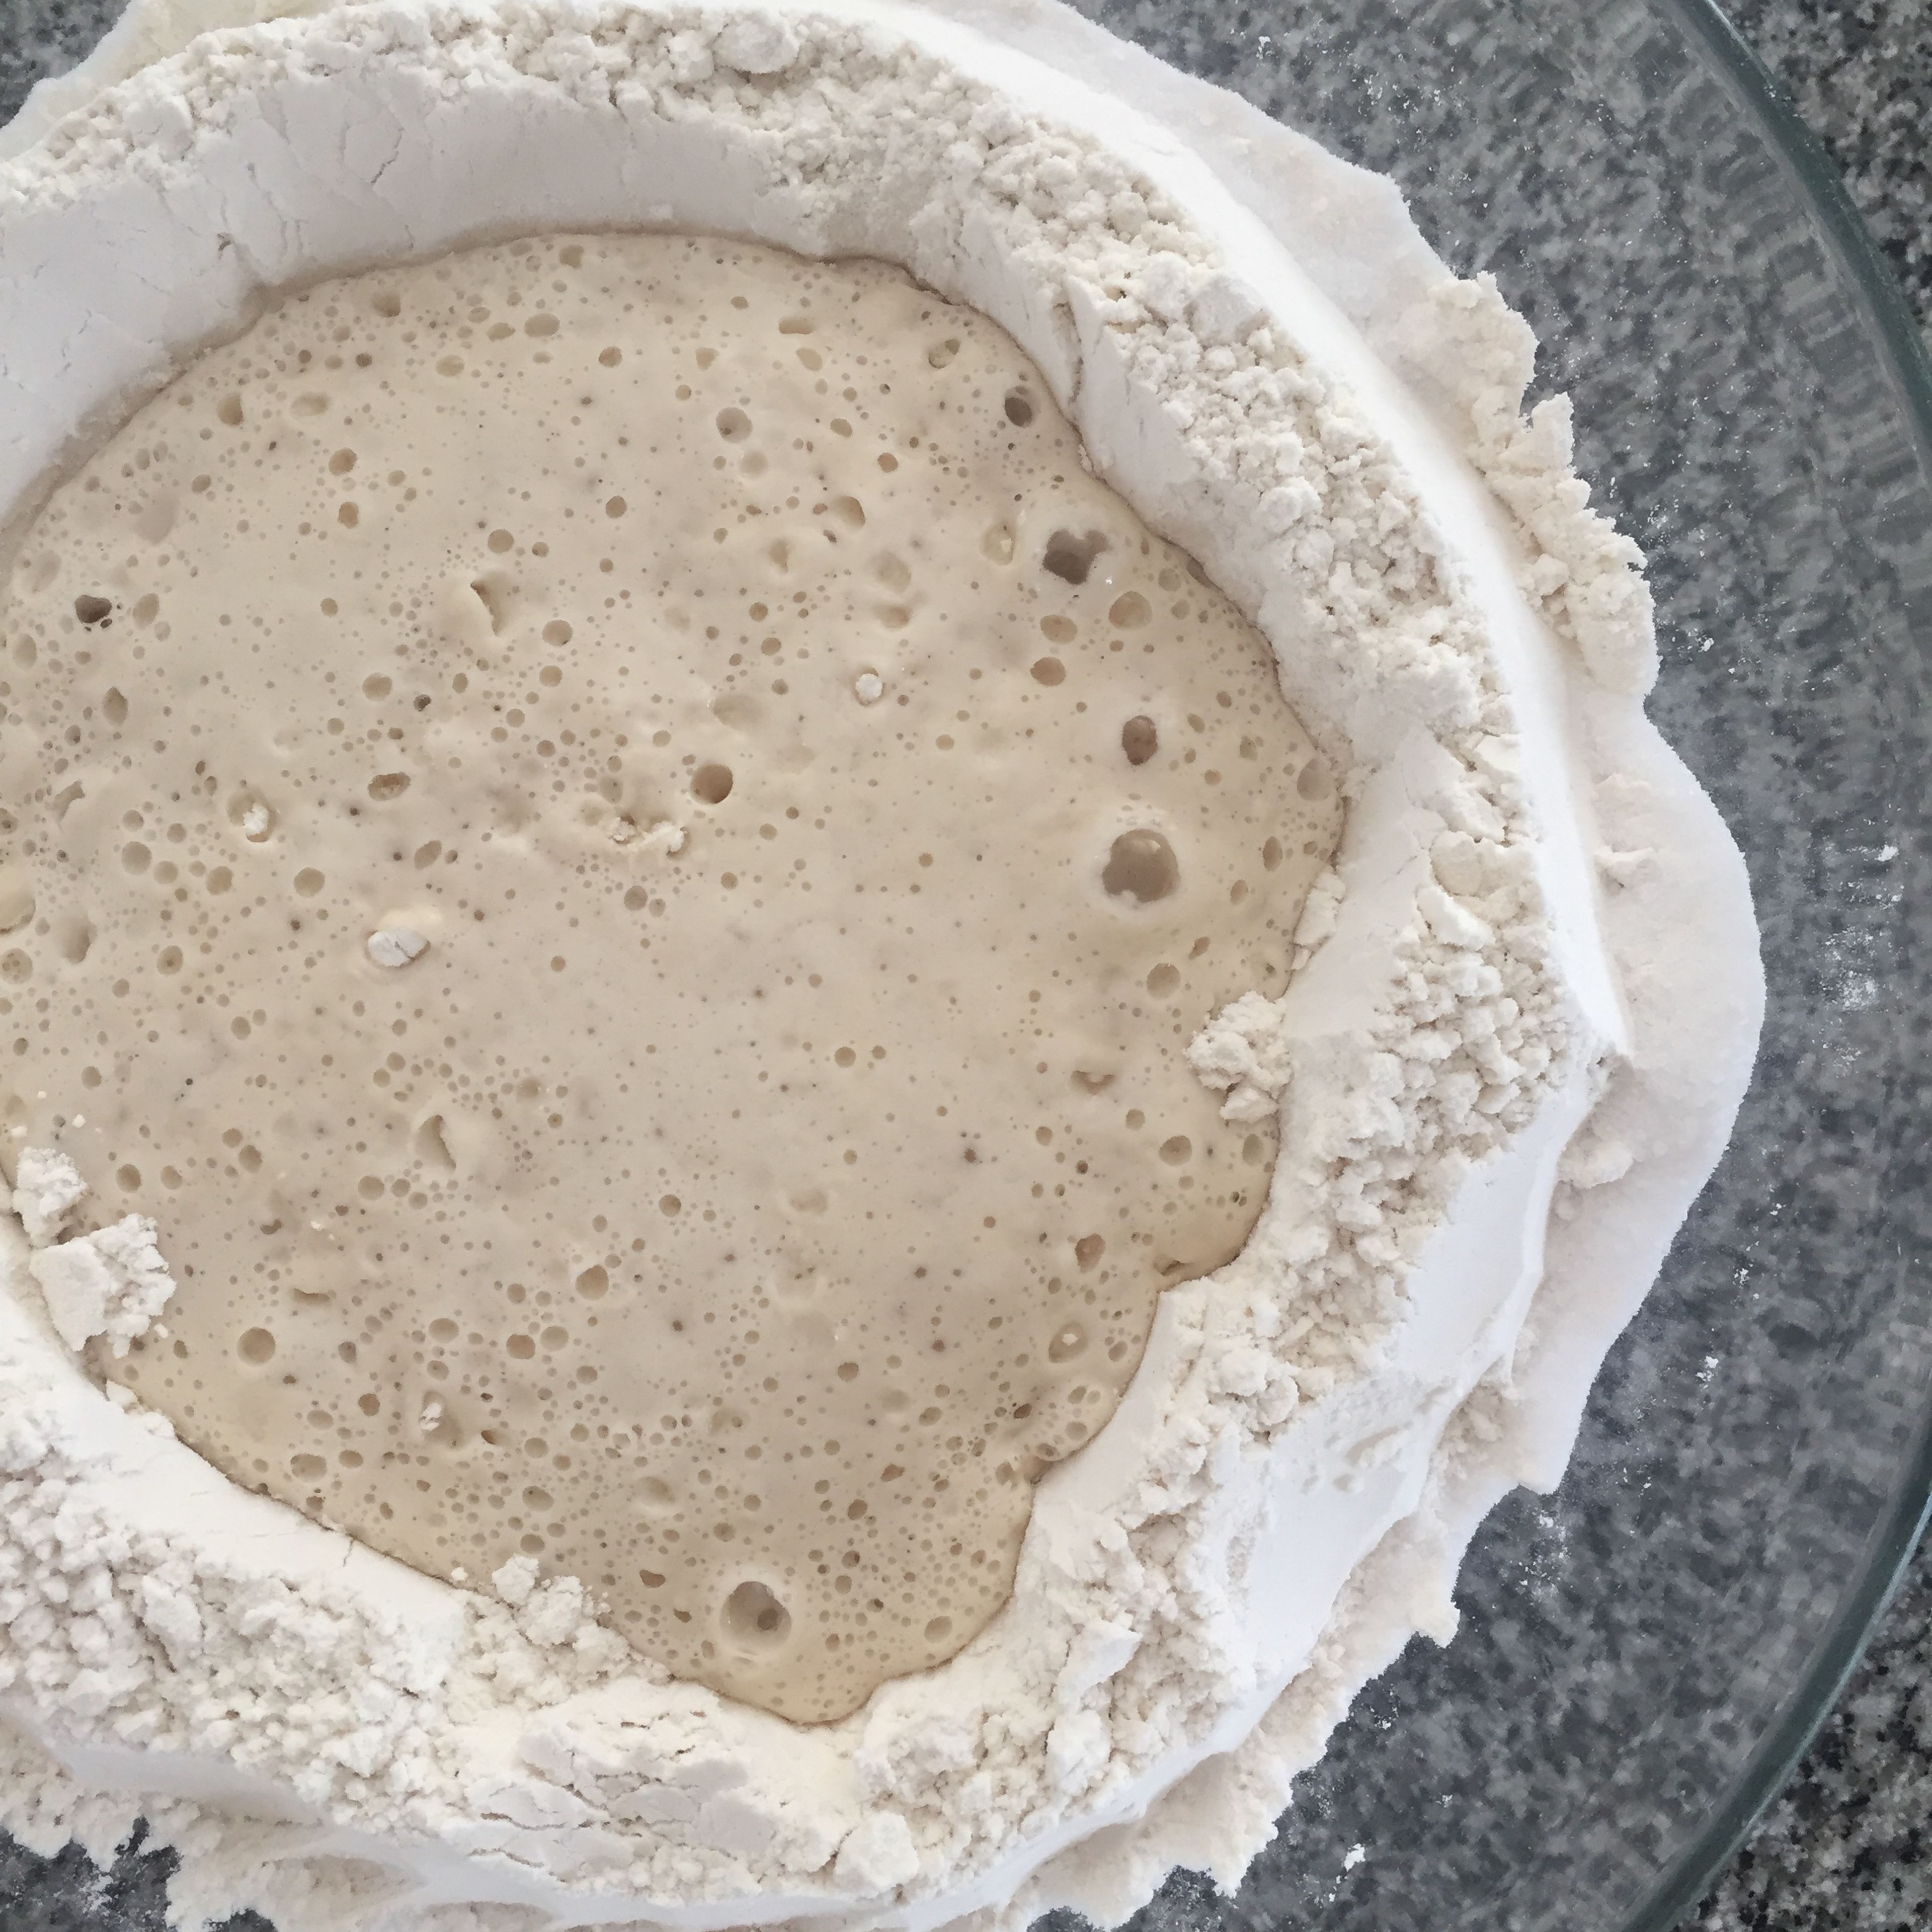 after twenty minutes of blooming, it should look something like this. Add the olive oil and salt (quick note: do NOT pour the salt into the yeast. It will kill it. Form a little border with the flour and pour it there.) Stir, then knead.